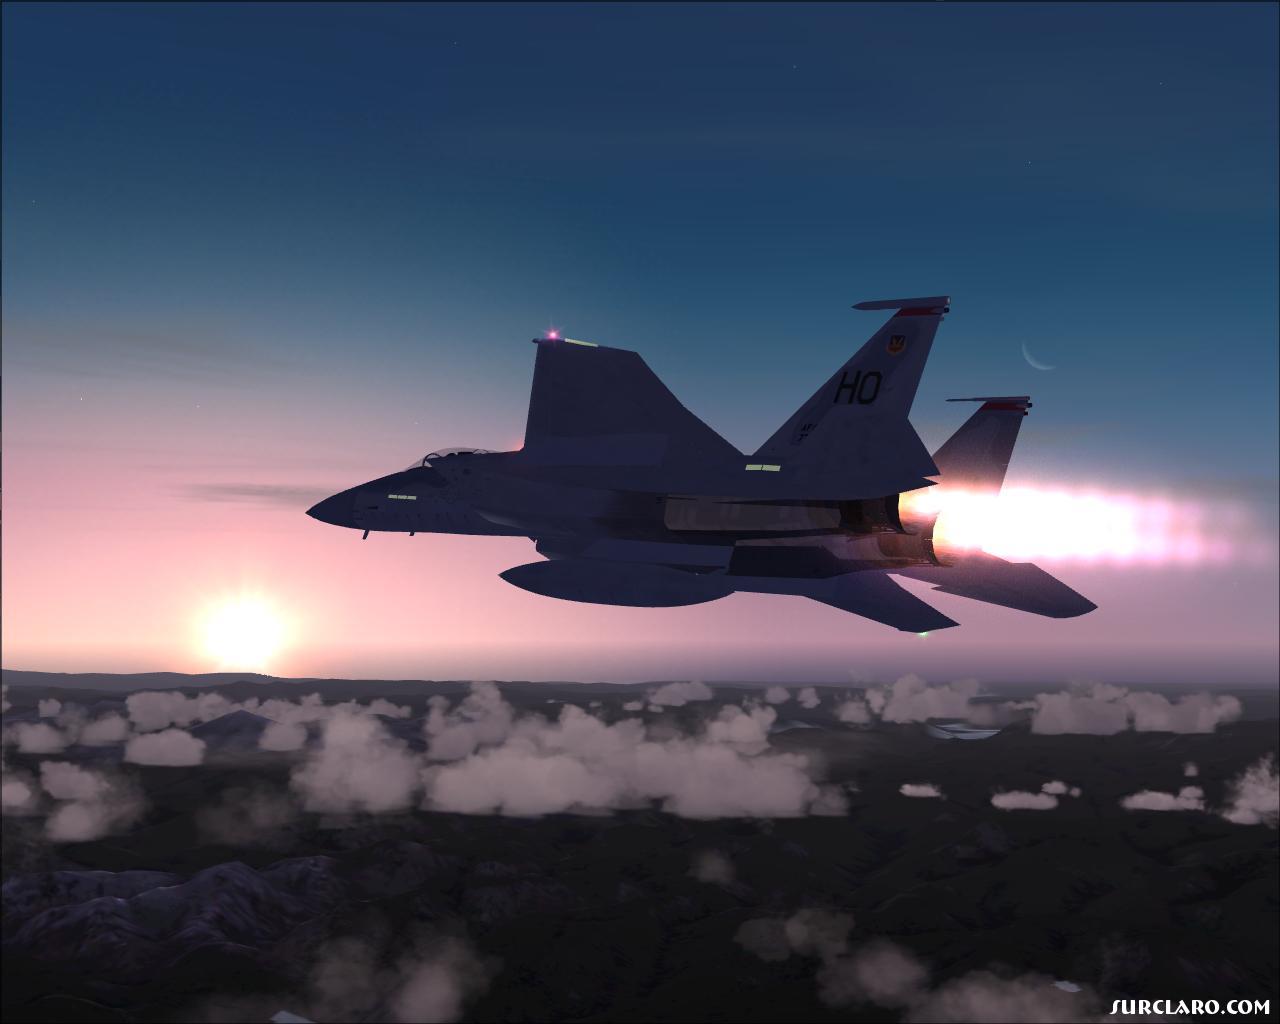 Awesome shot of an F-15 by Coral. - Photo 15466